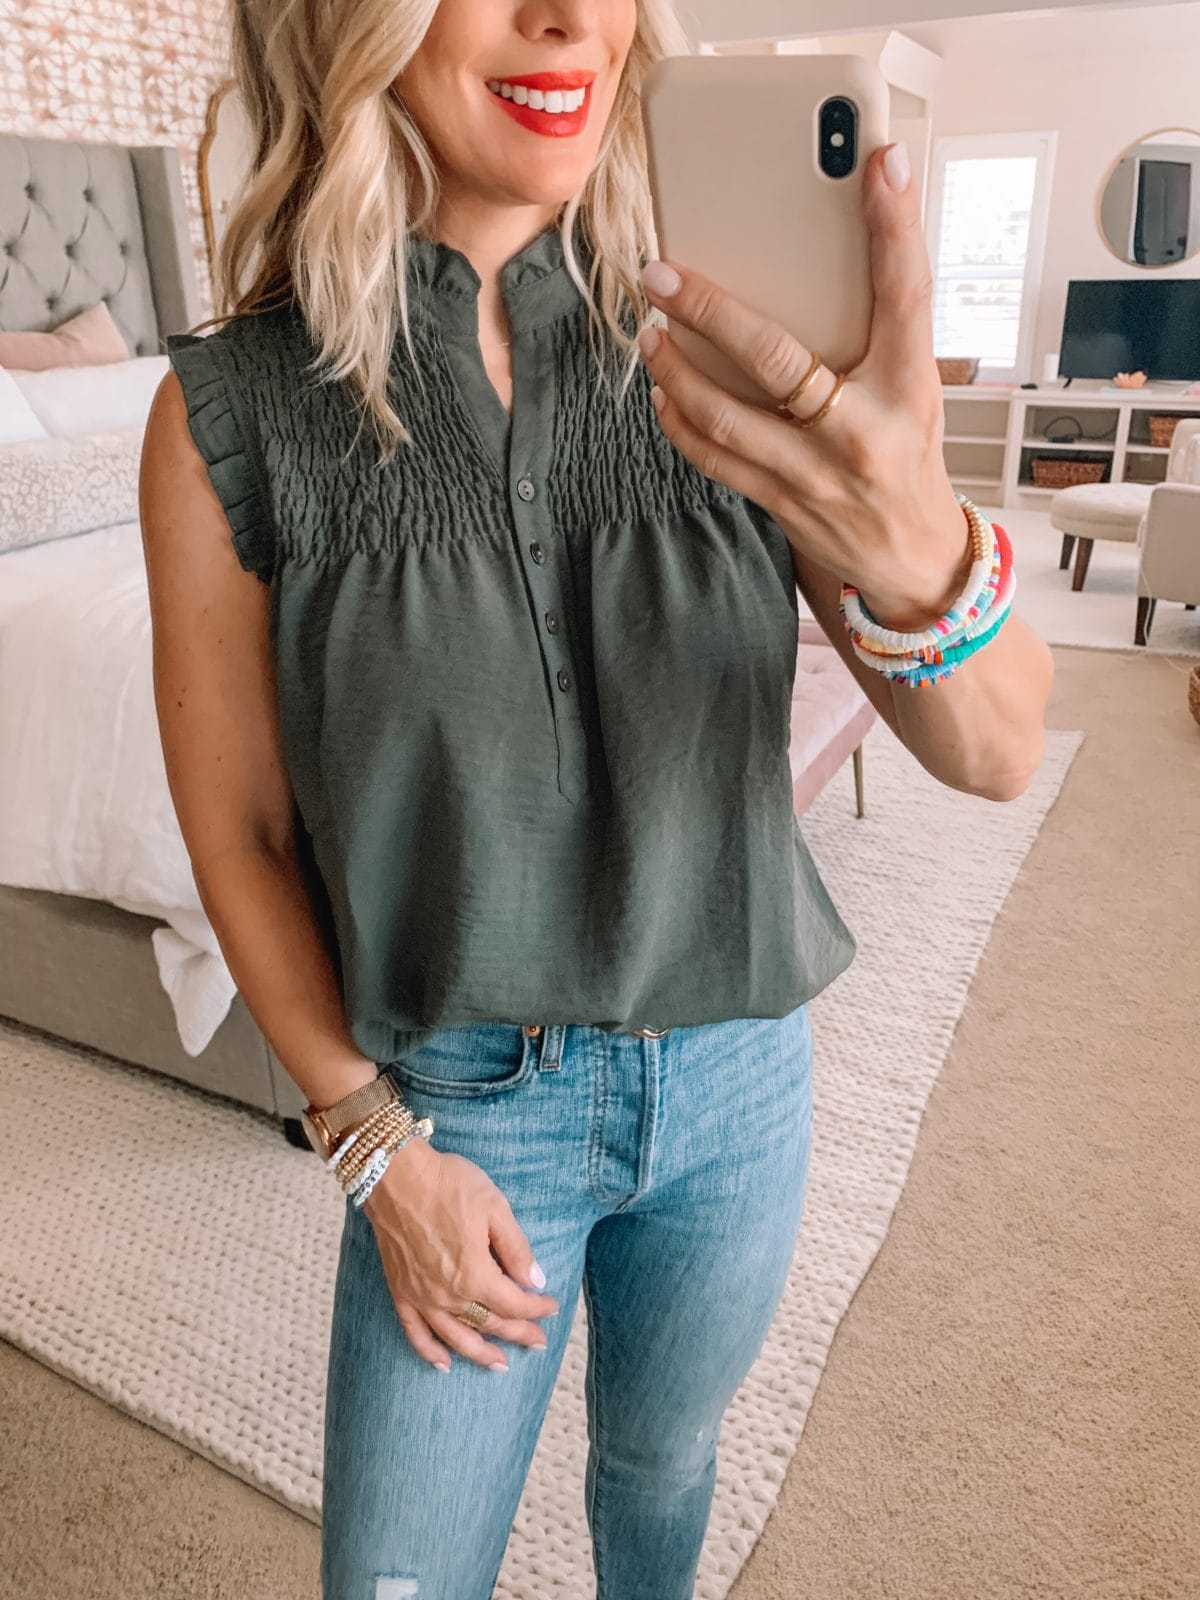 Amazon Fashion Finds, Smocked Sleeveless Top, Skinny Jeans